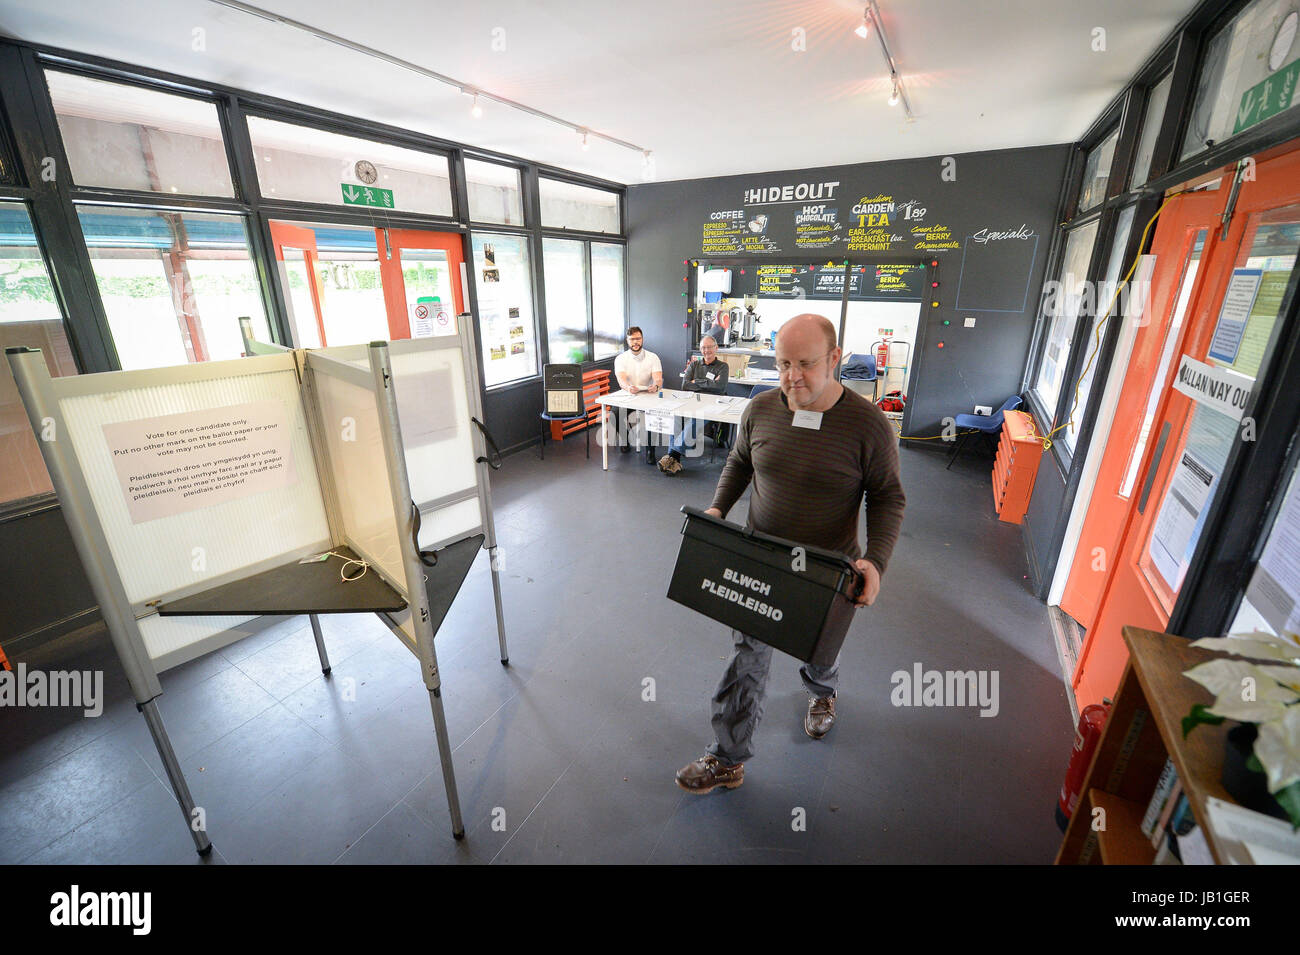 A Welsh 'Blwch Pleidleisio' or 'Ballot Box' is carried inside the Grange Pavilion bowling club, which is a polling station in Grangetown, Cardiff, as voters head to the polls across the UK to vote in the General Election. Stock Photo